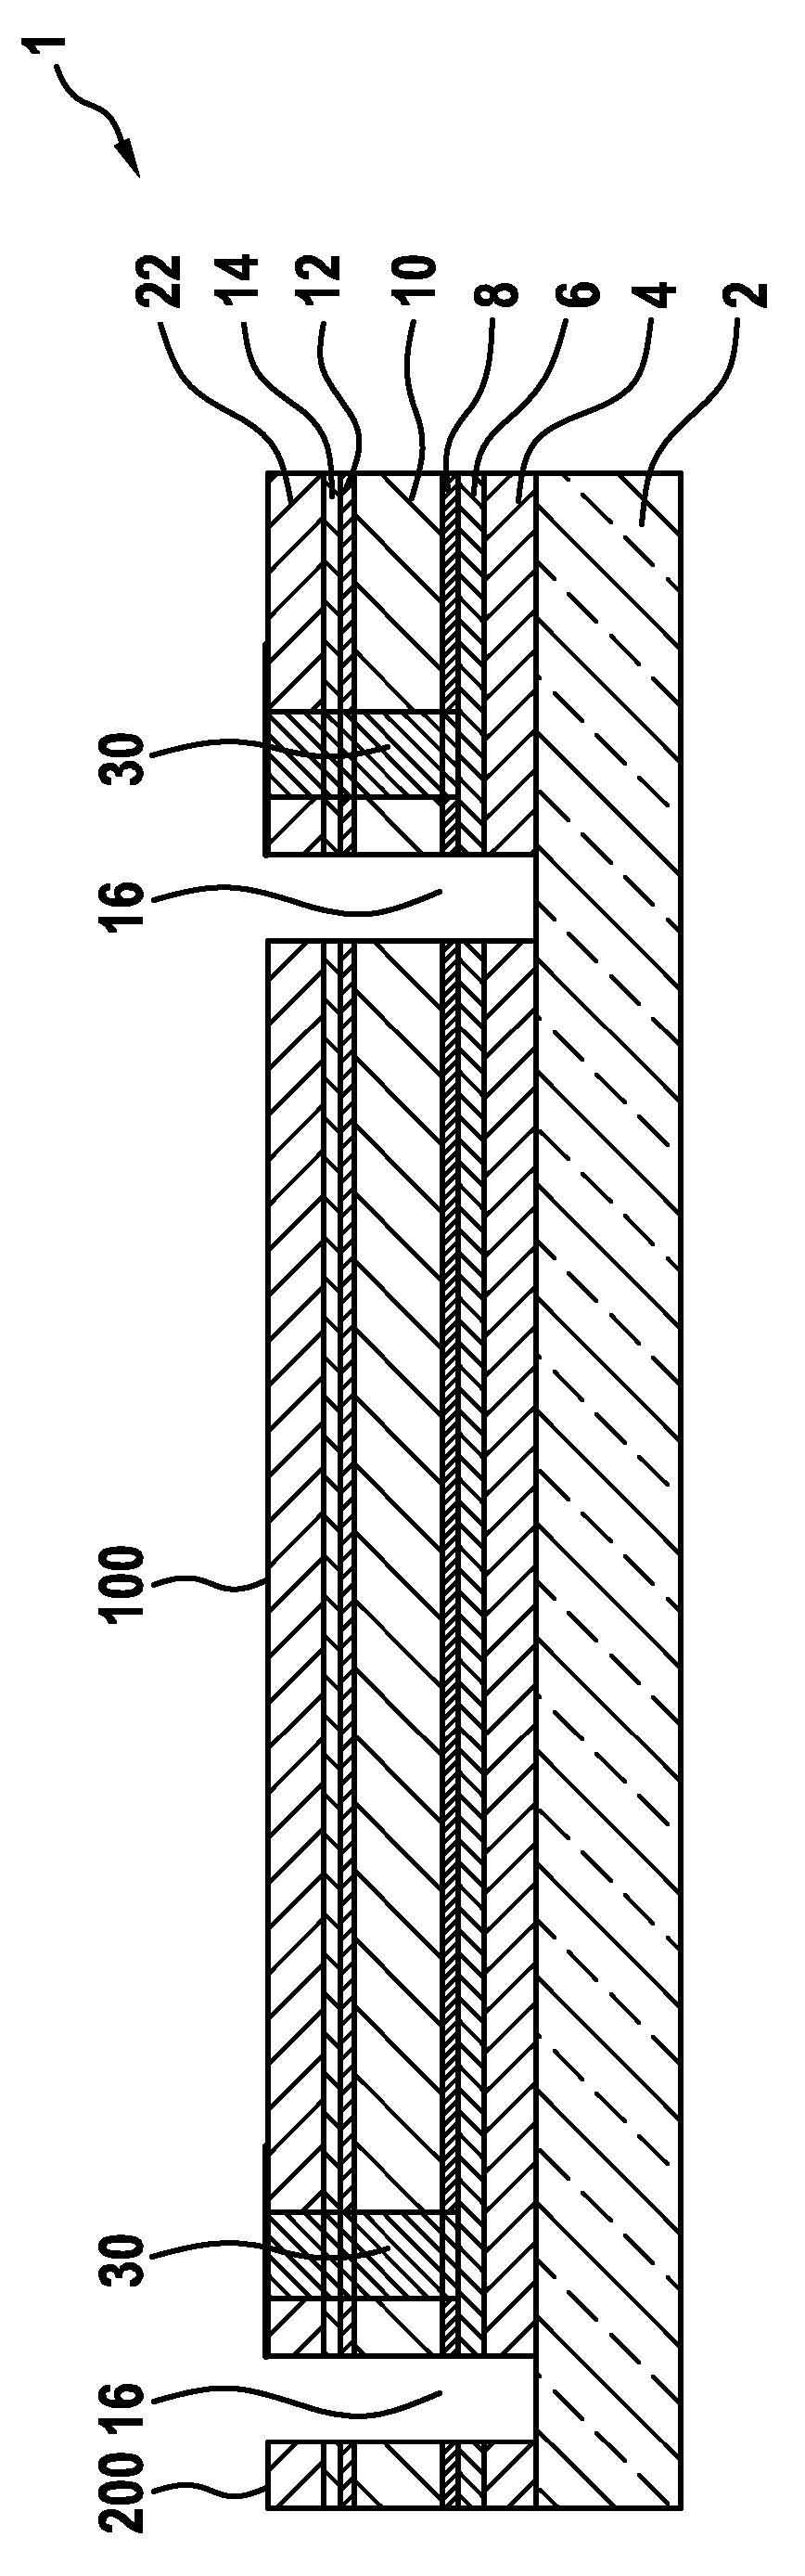 Photovoltaic thin-film solar modules and method for producing such thin-film solar modules